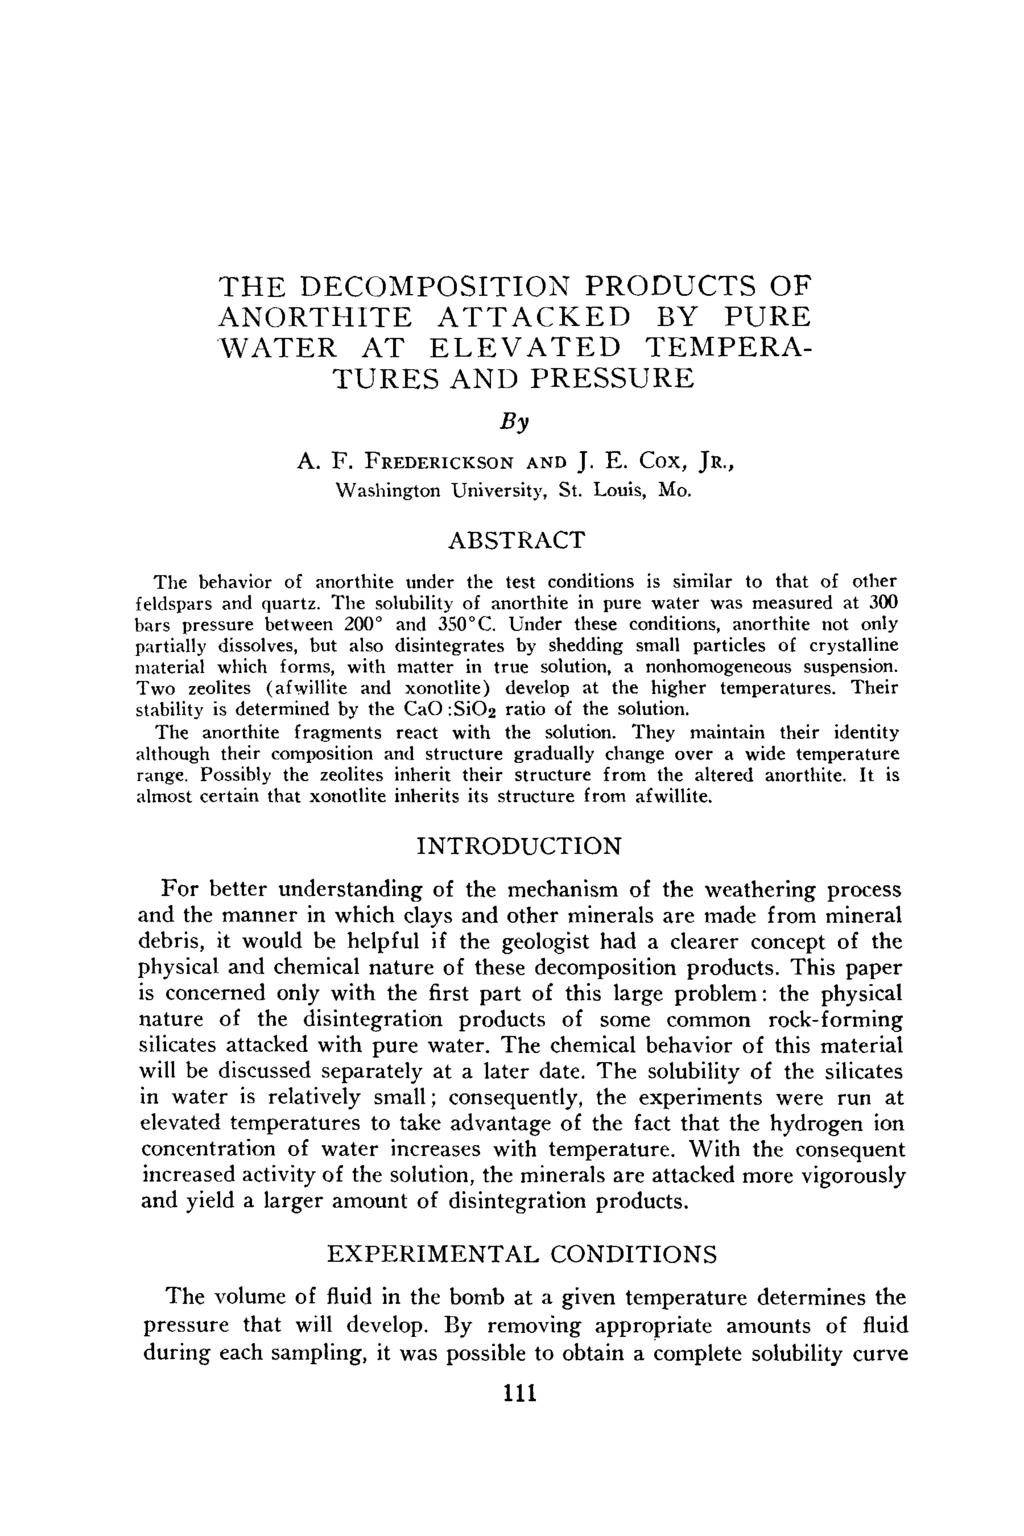 THE DECOMPOSITION PRODUCTS OF ANORTHITE ATTACKED BY PURE WATER AT ELEVATED TEMPERA- TURES AND PRESSURE By A. F. FREDERICKSON AND J. E. Cox, JR., Washington University, St. Louis, Mo.